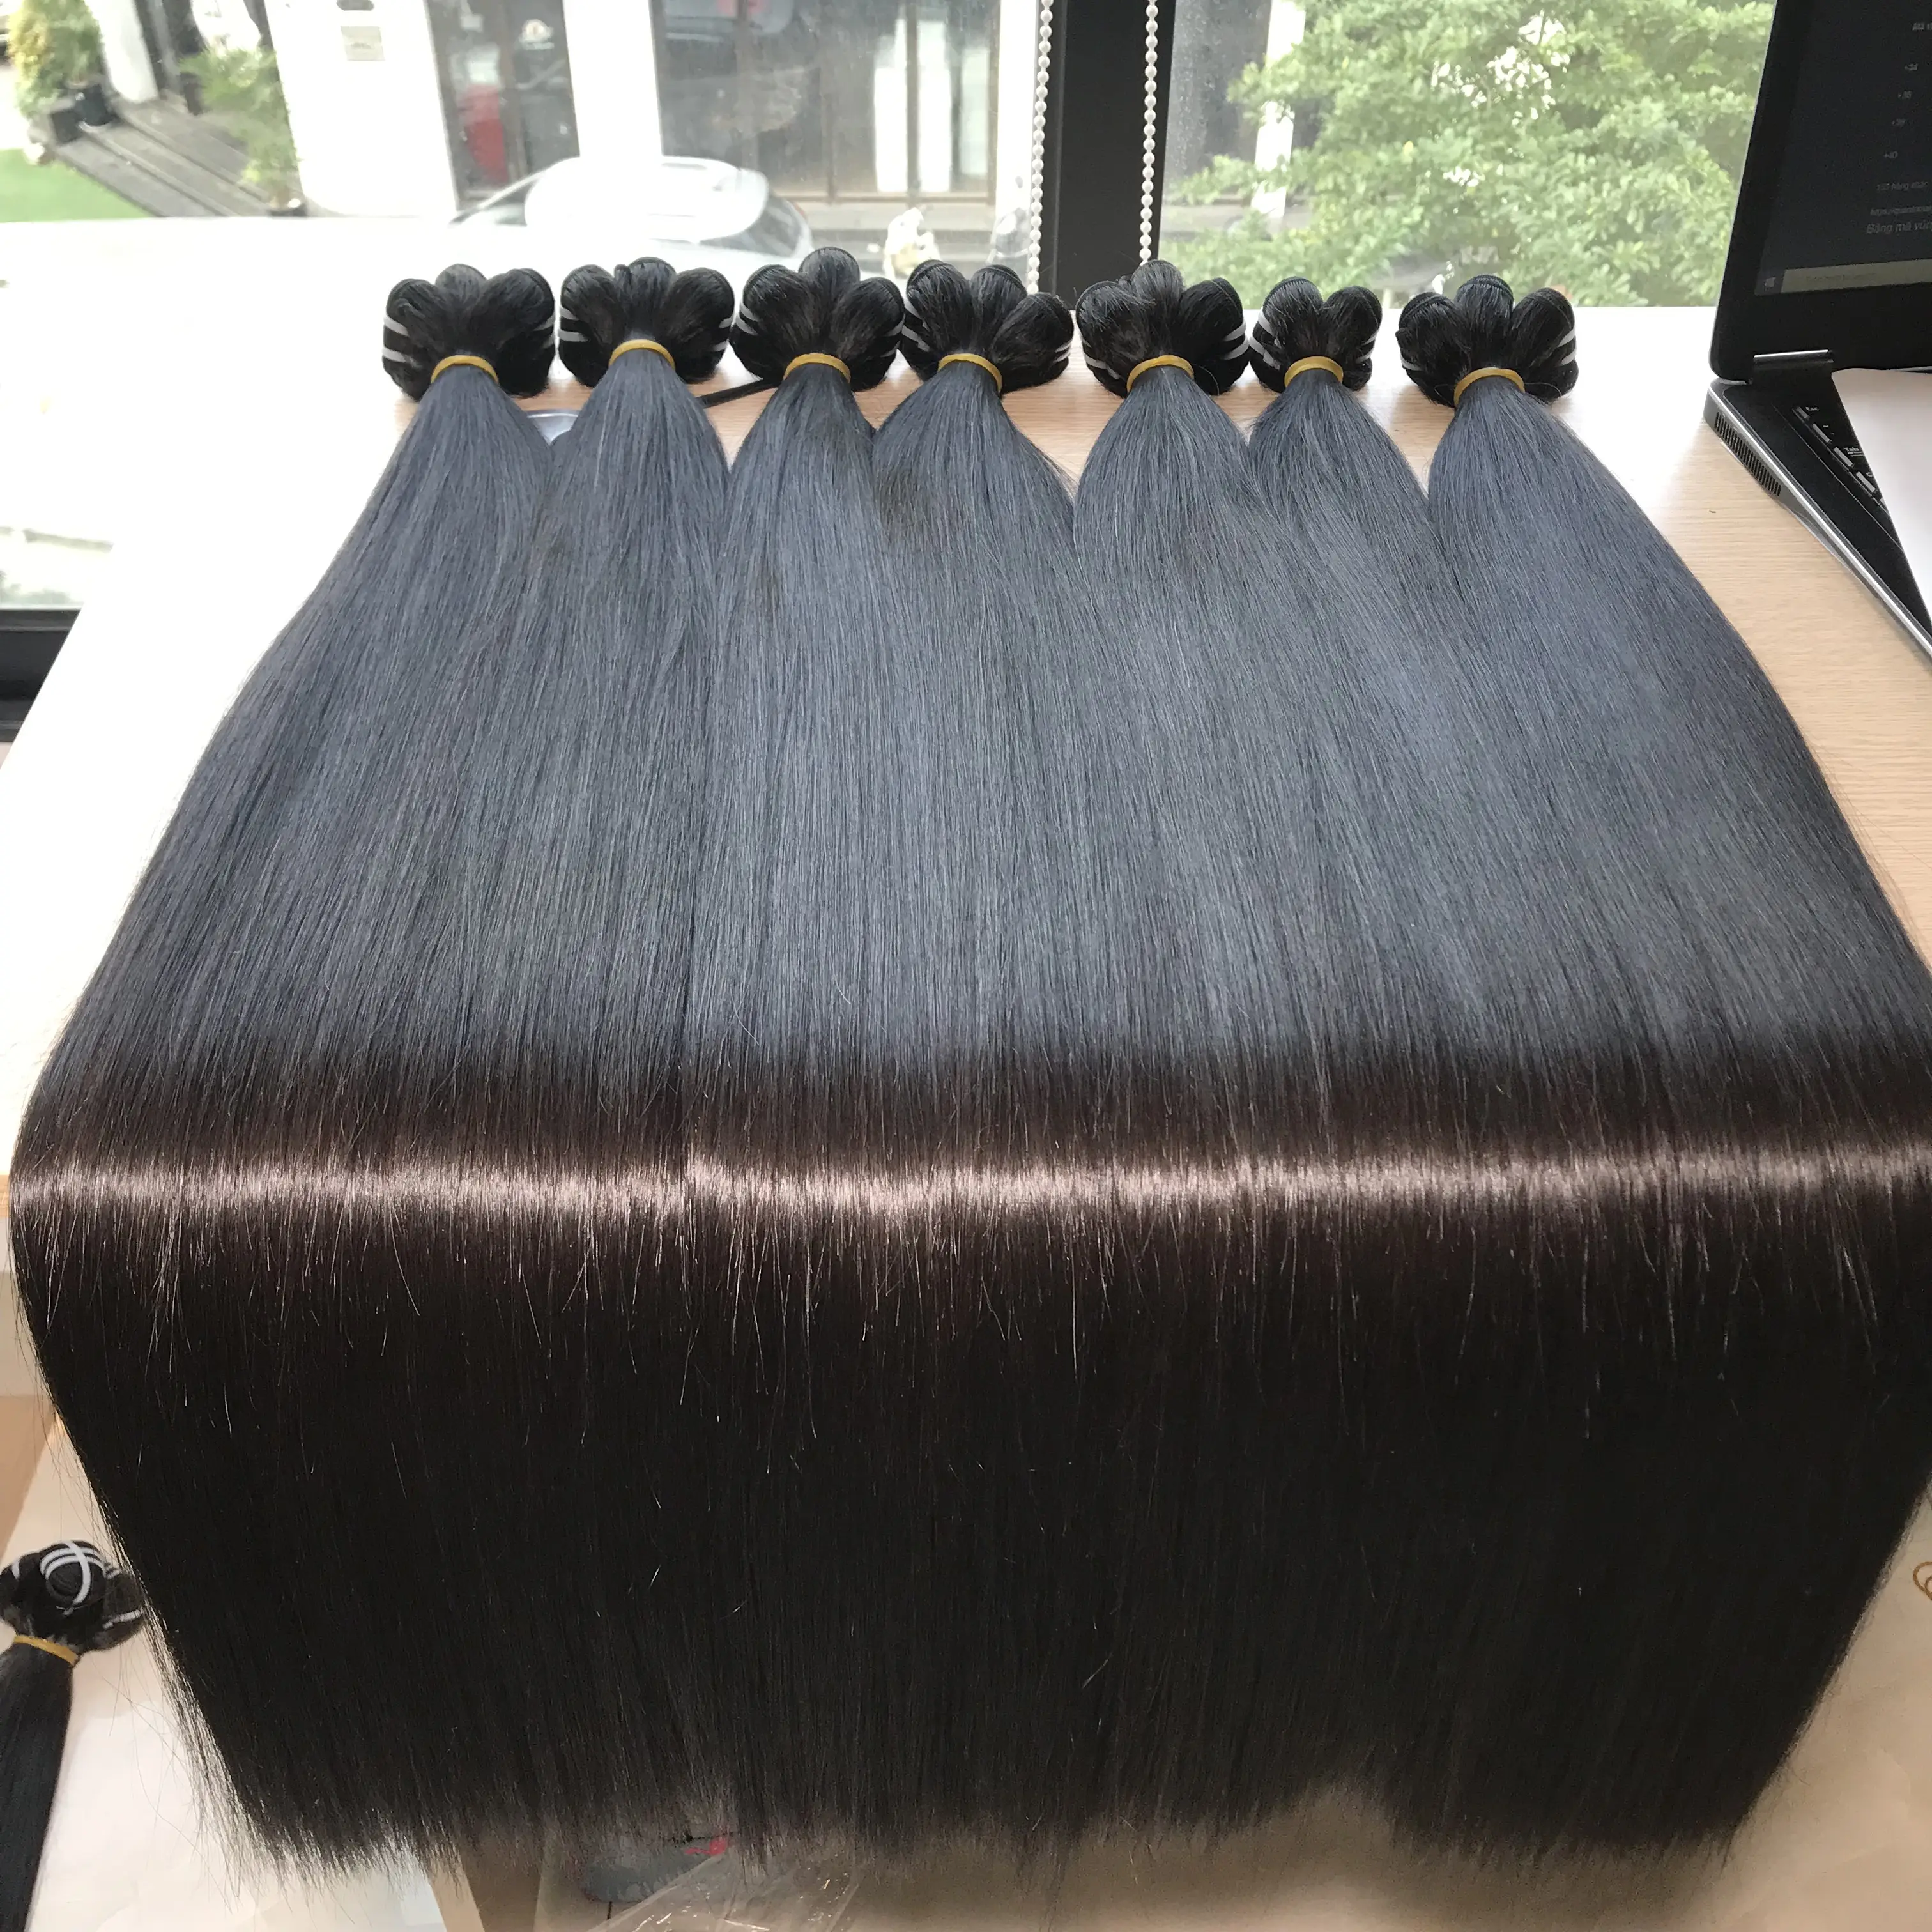 Best Quality Super Double Drawn Bone Straight Weft Natural Black Raw Vietnamese Human Hair Extensions 26" Available